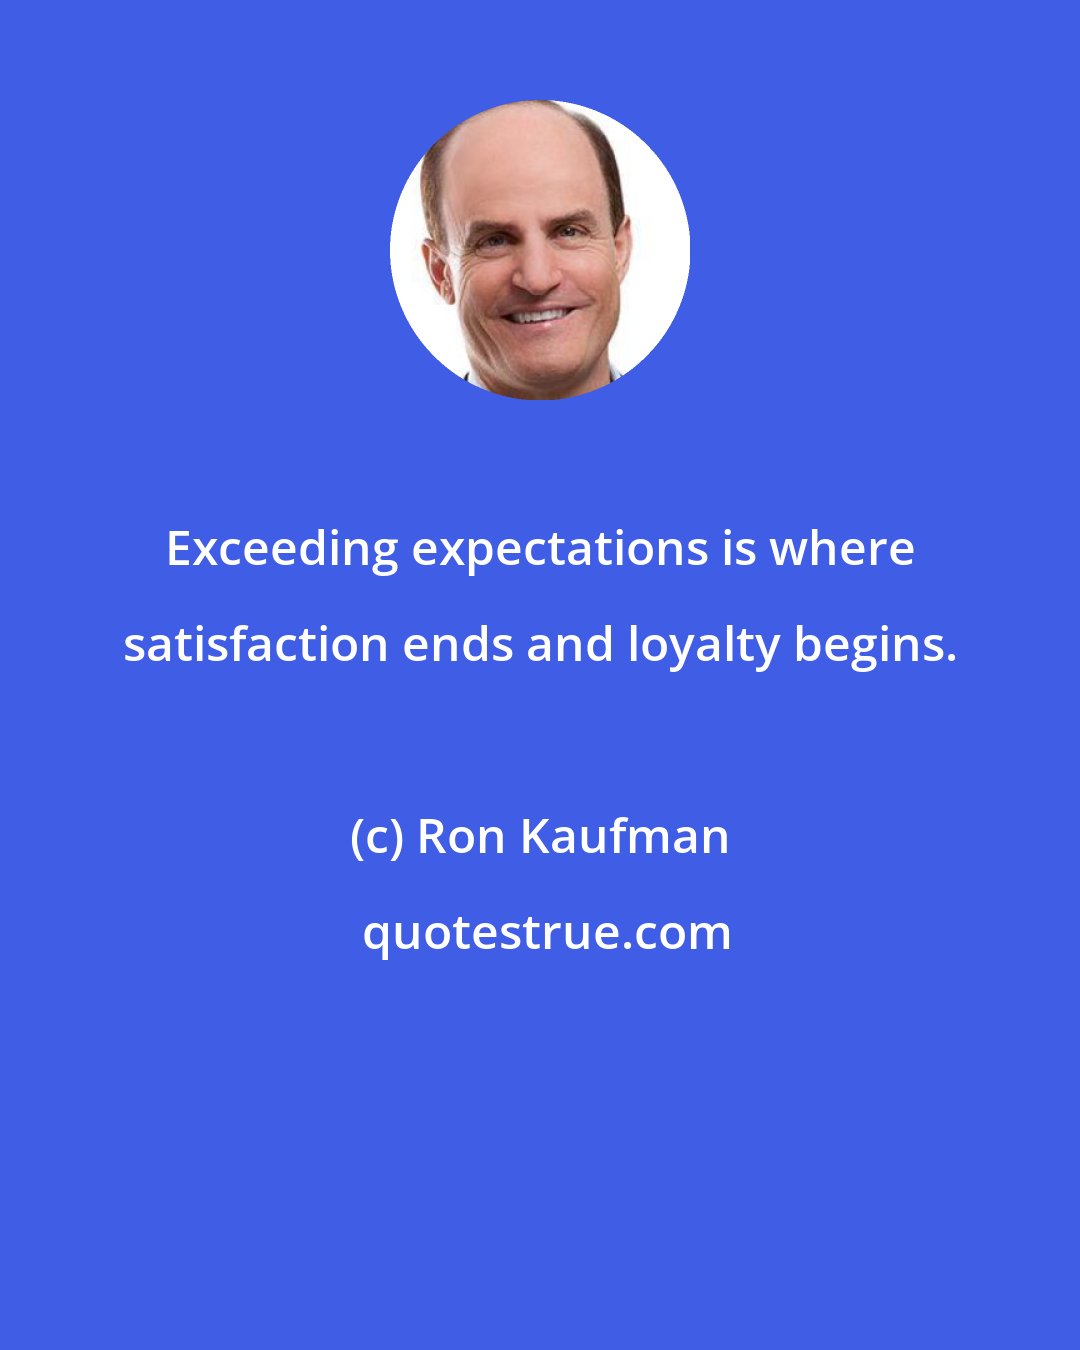 Ron Kaufman: Exceeding expectations is where satisfaction ends and loyalty begins.